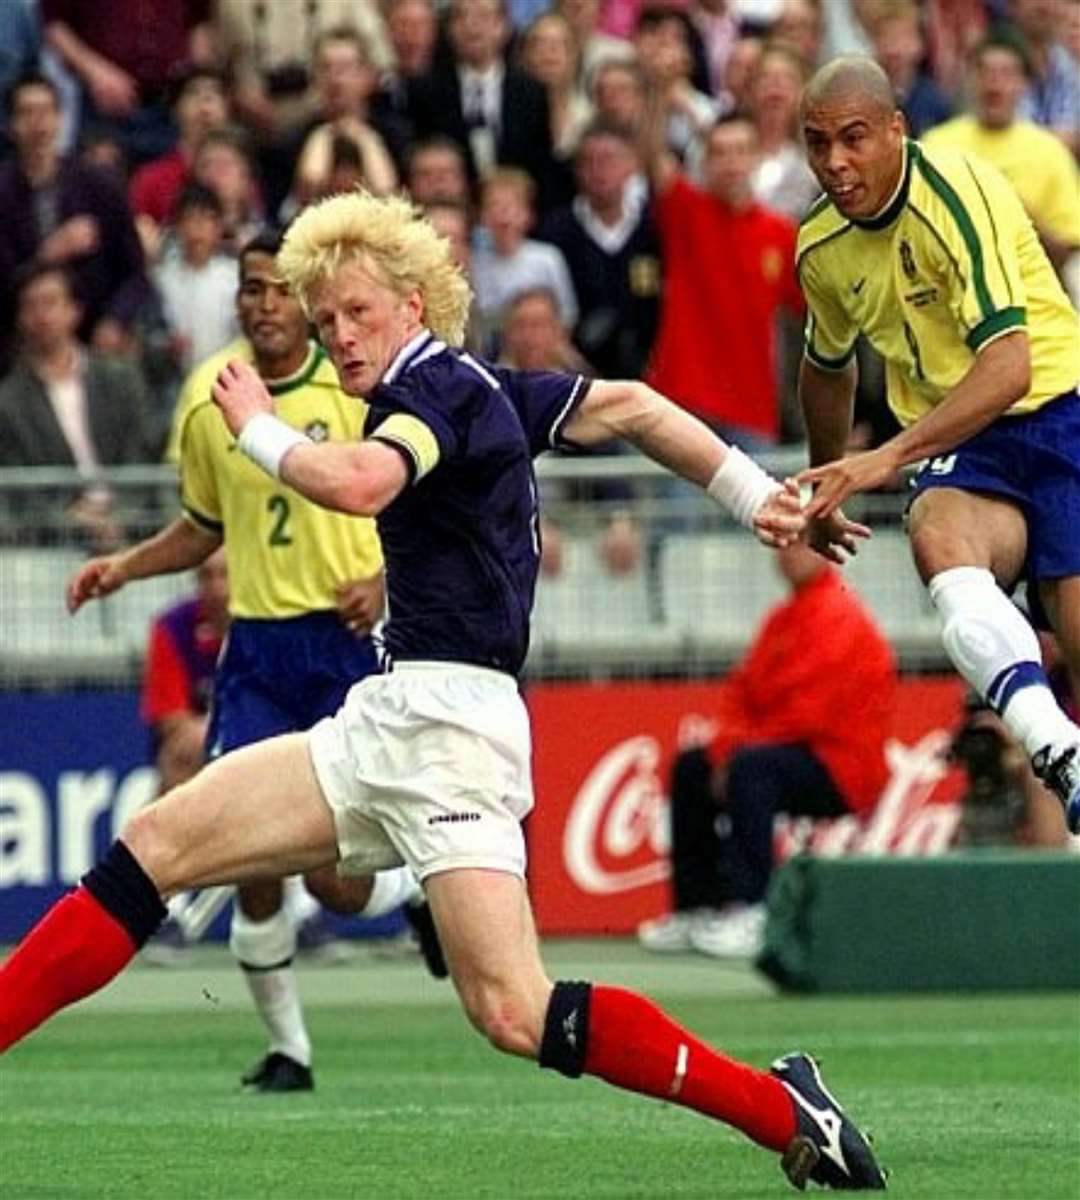 Colin Hendry in World Cup action for Scotland in 1998, coming up against Brazil's Ronaldo.